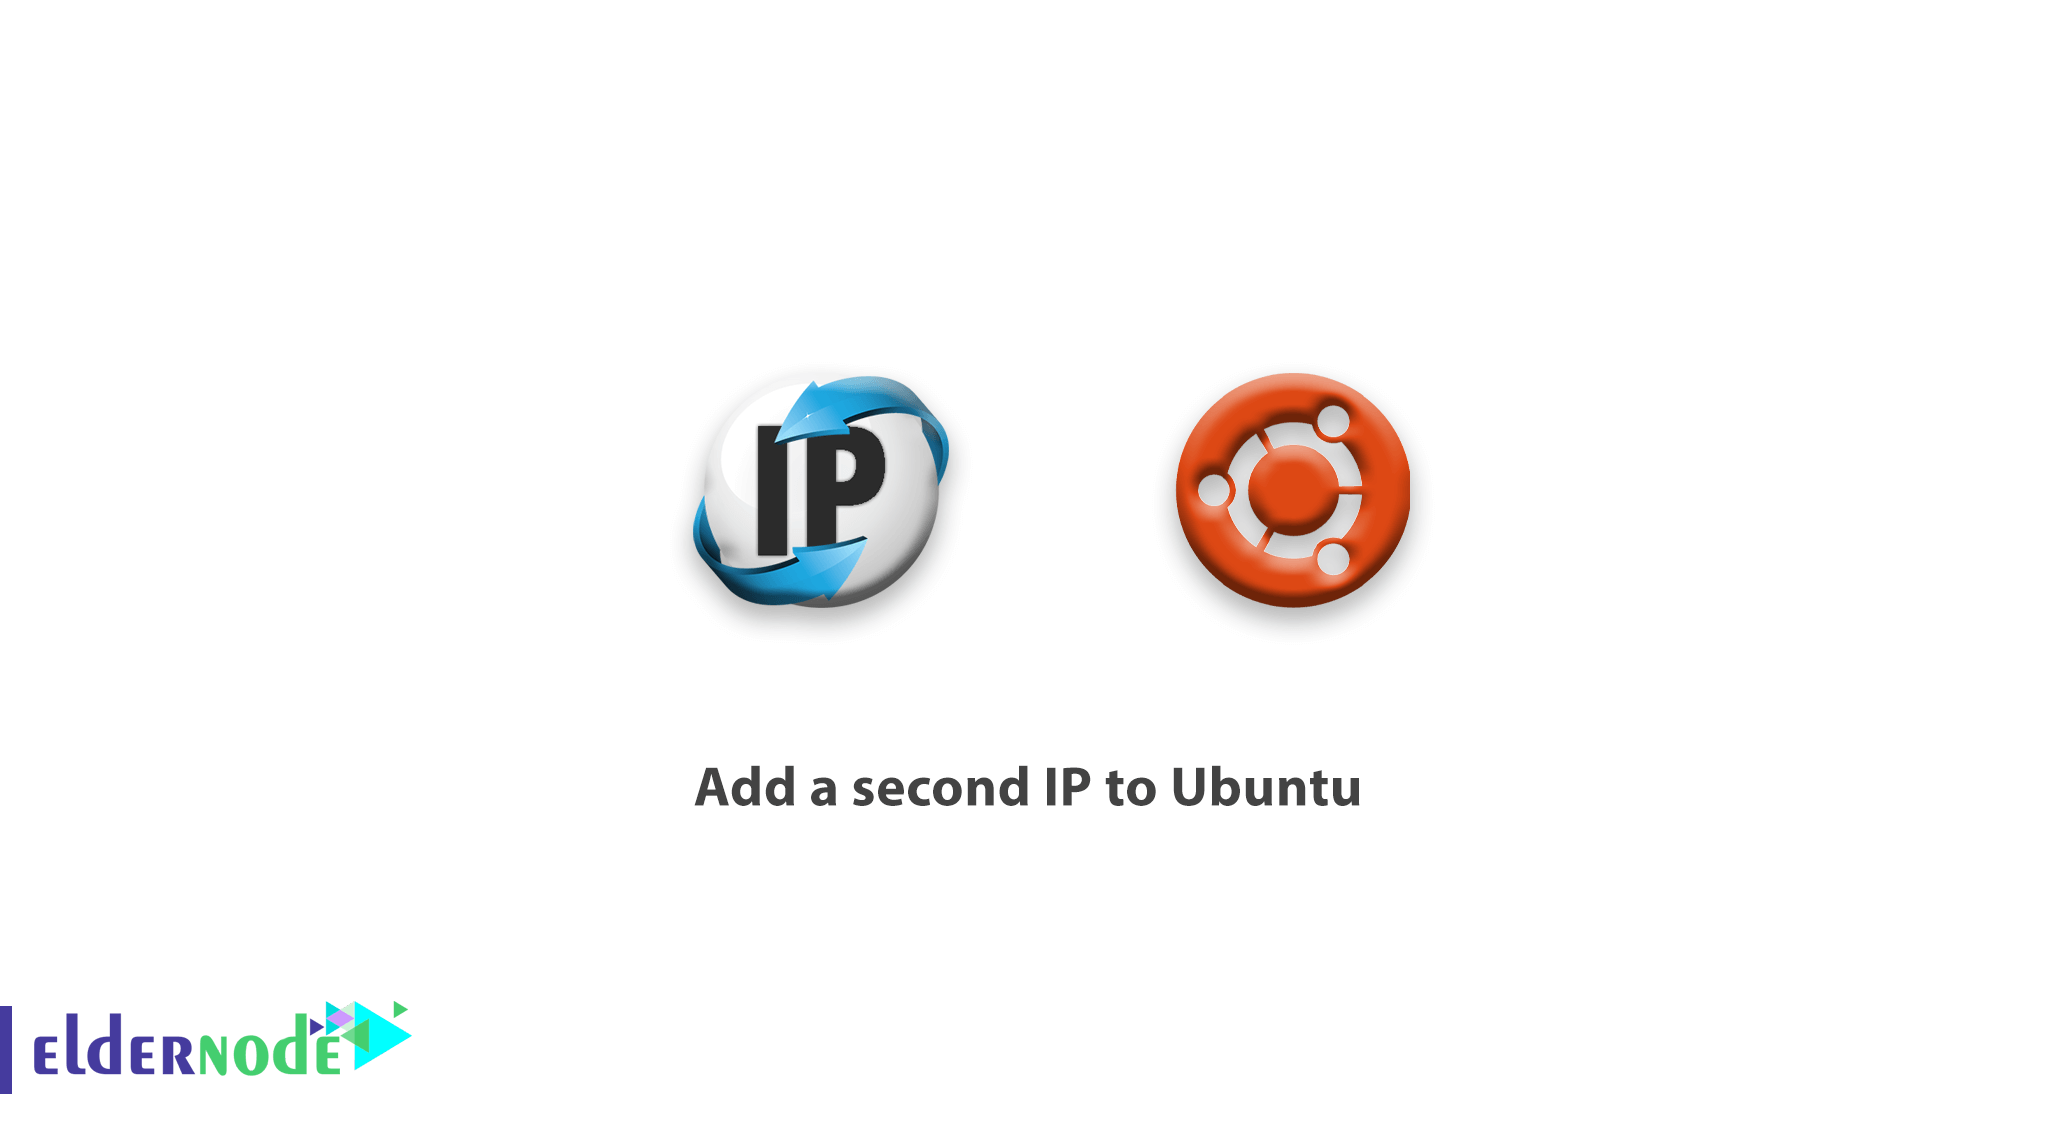 How to add a second IP to Ubuntu